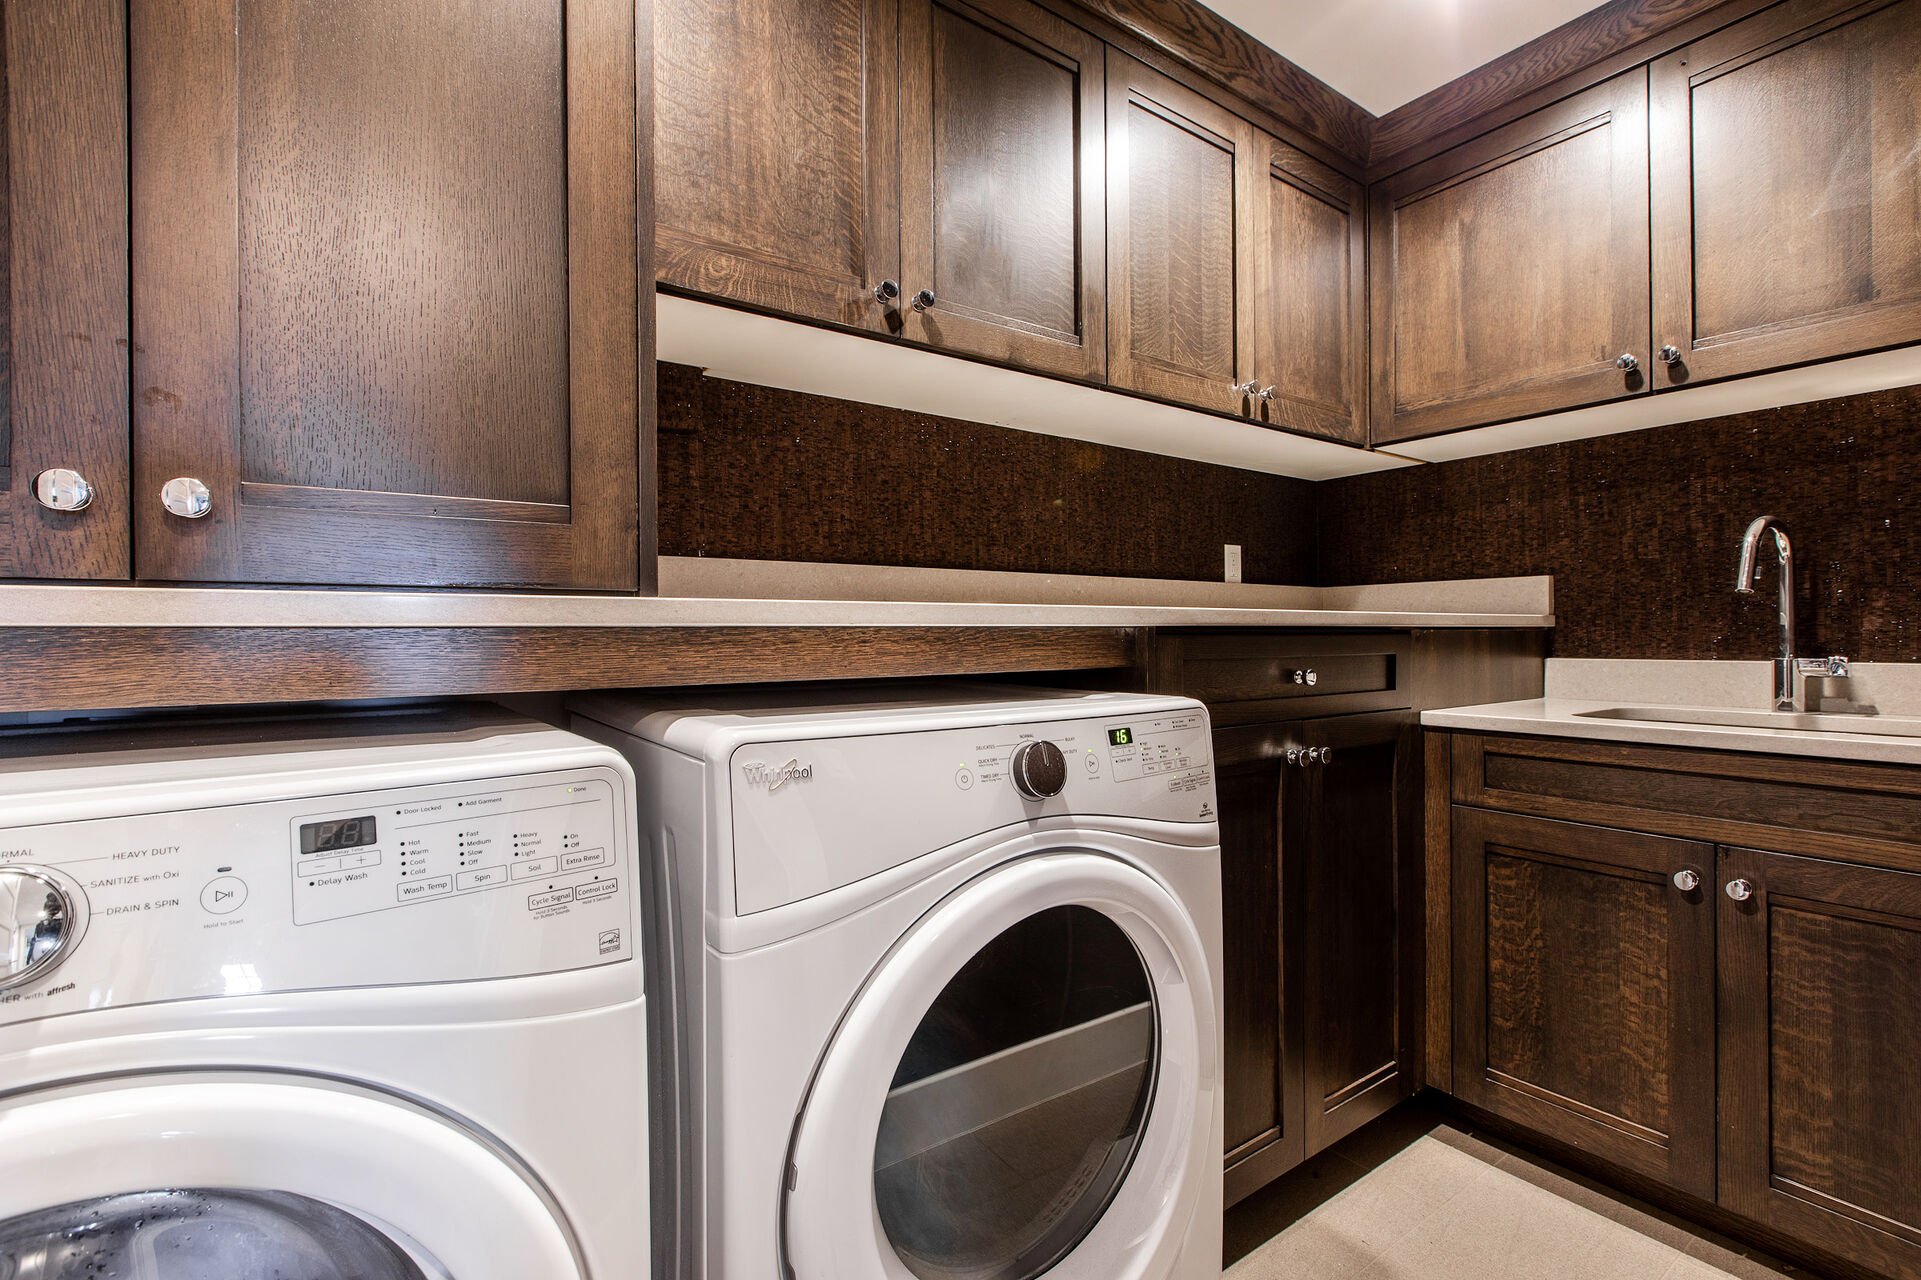 Full Laundry Room with Full-size Washer and Dryer